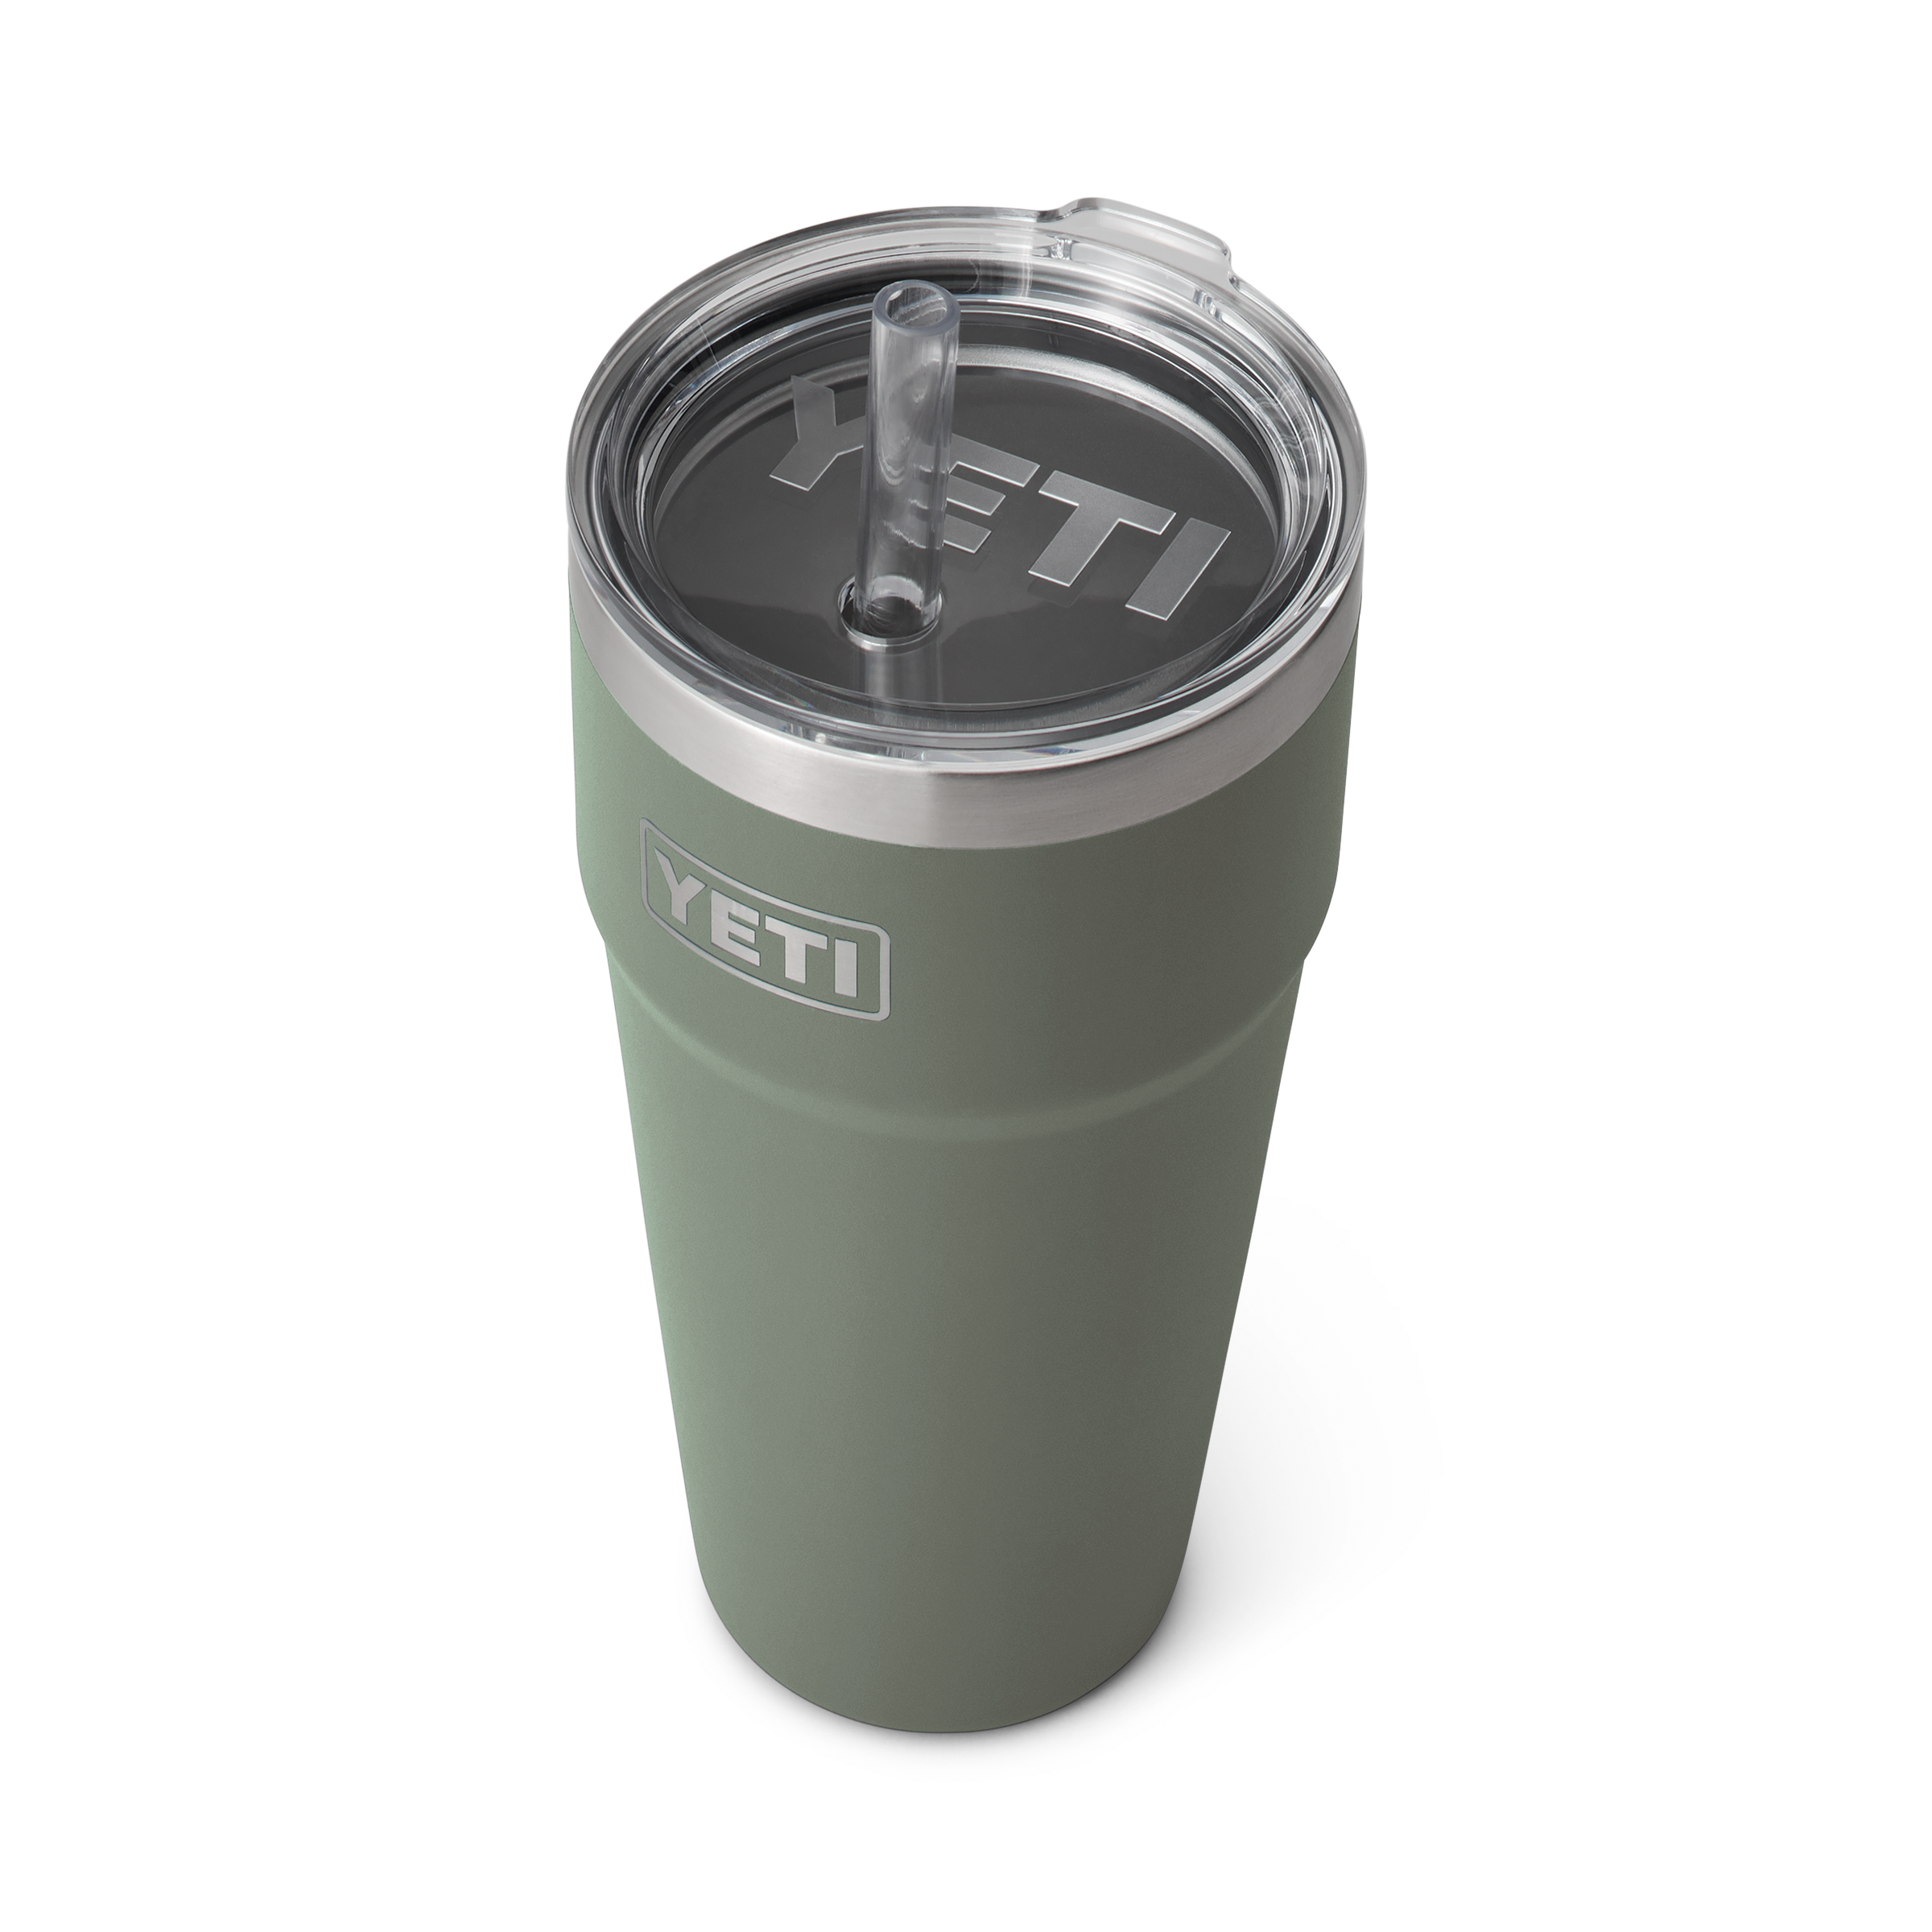 A YETI Rambler 26 oz Cup with a Straw lid, in color: Camp Green.